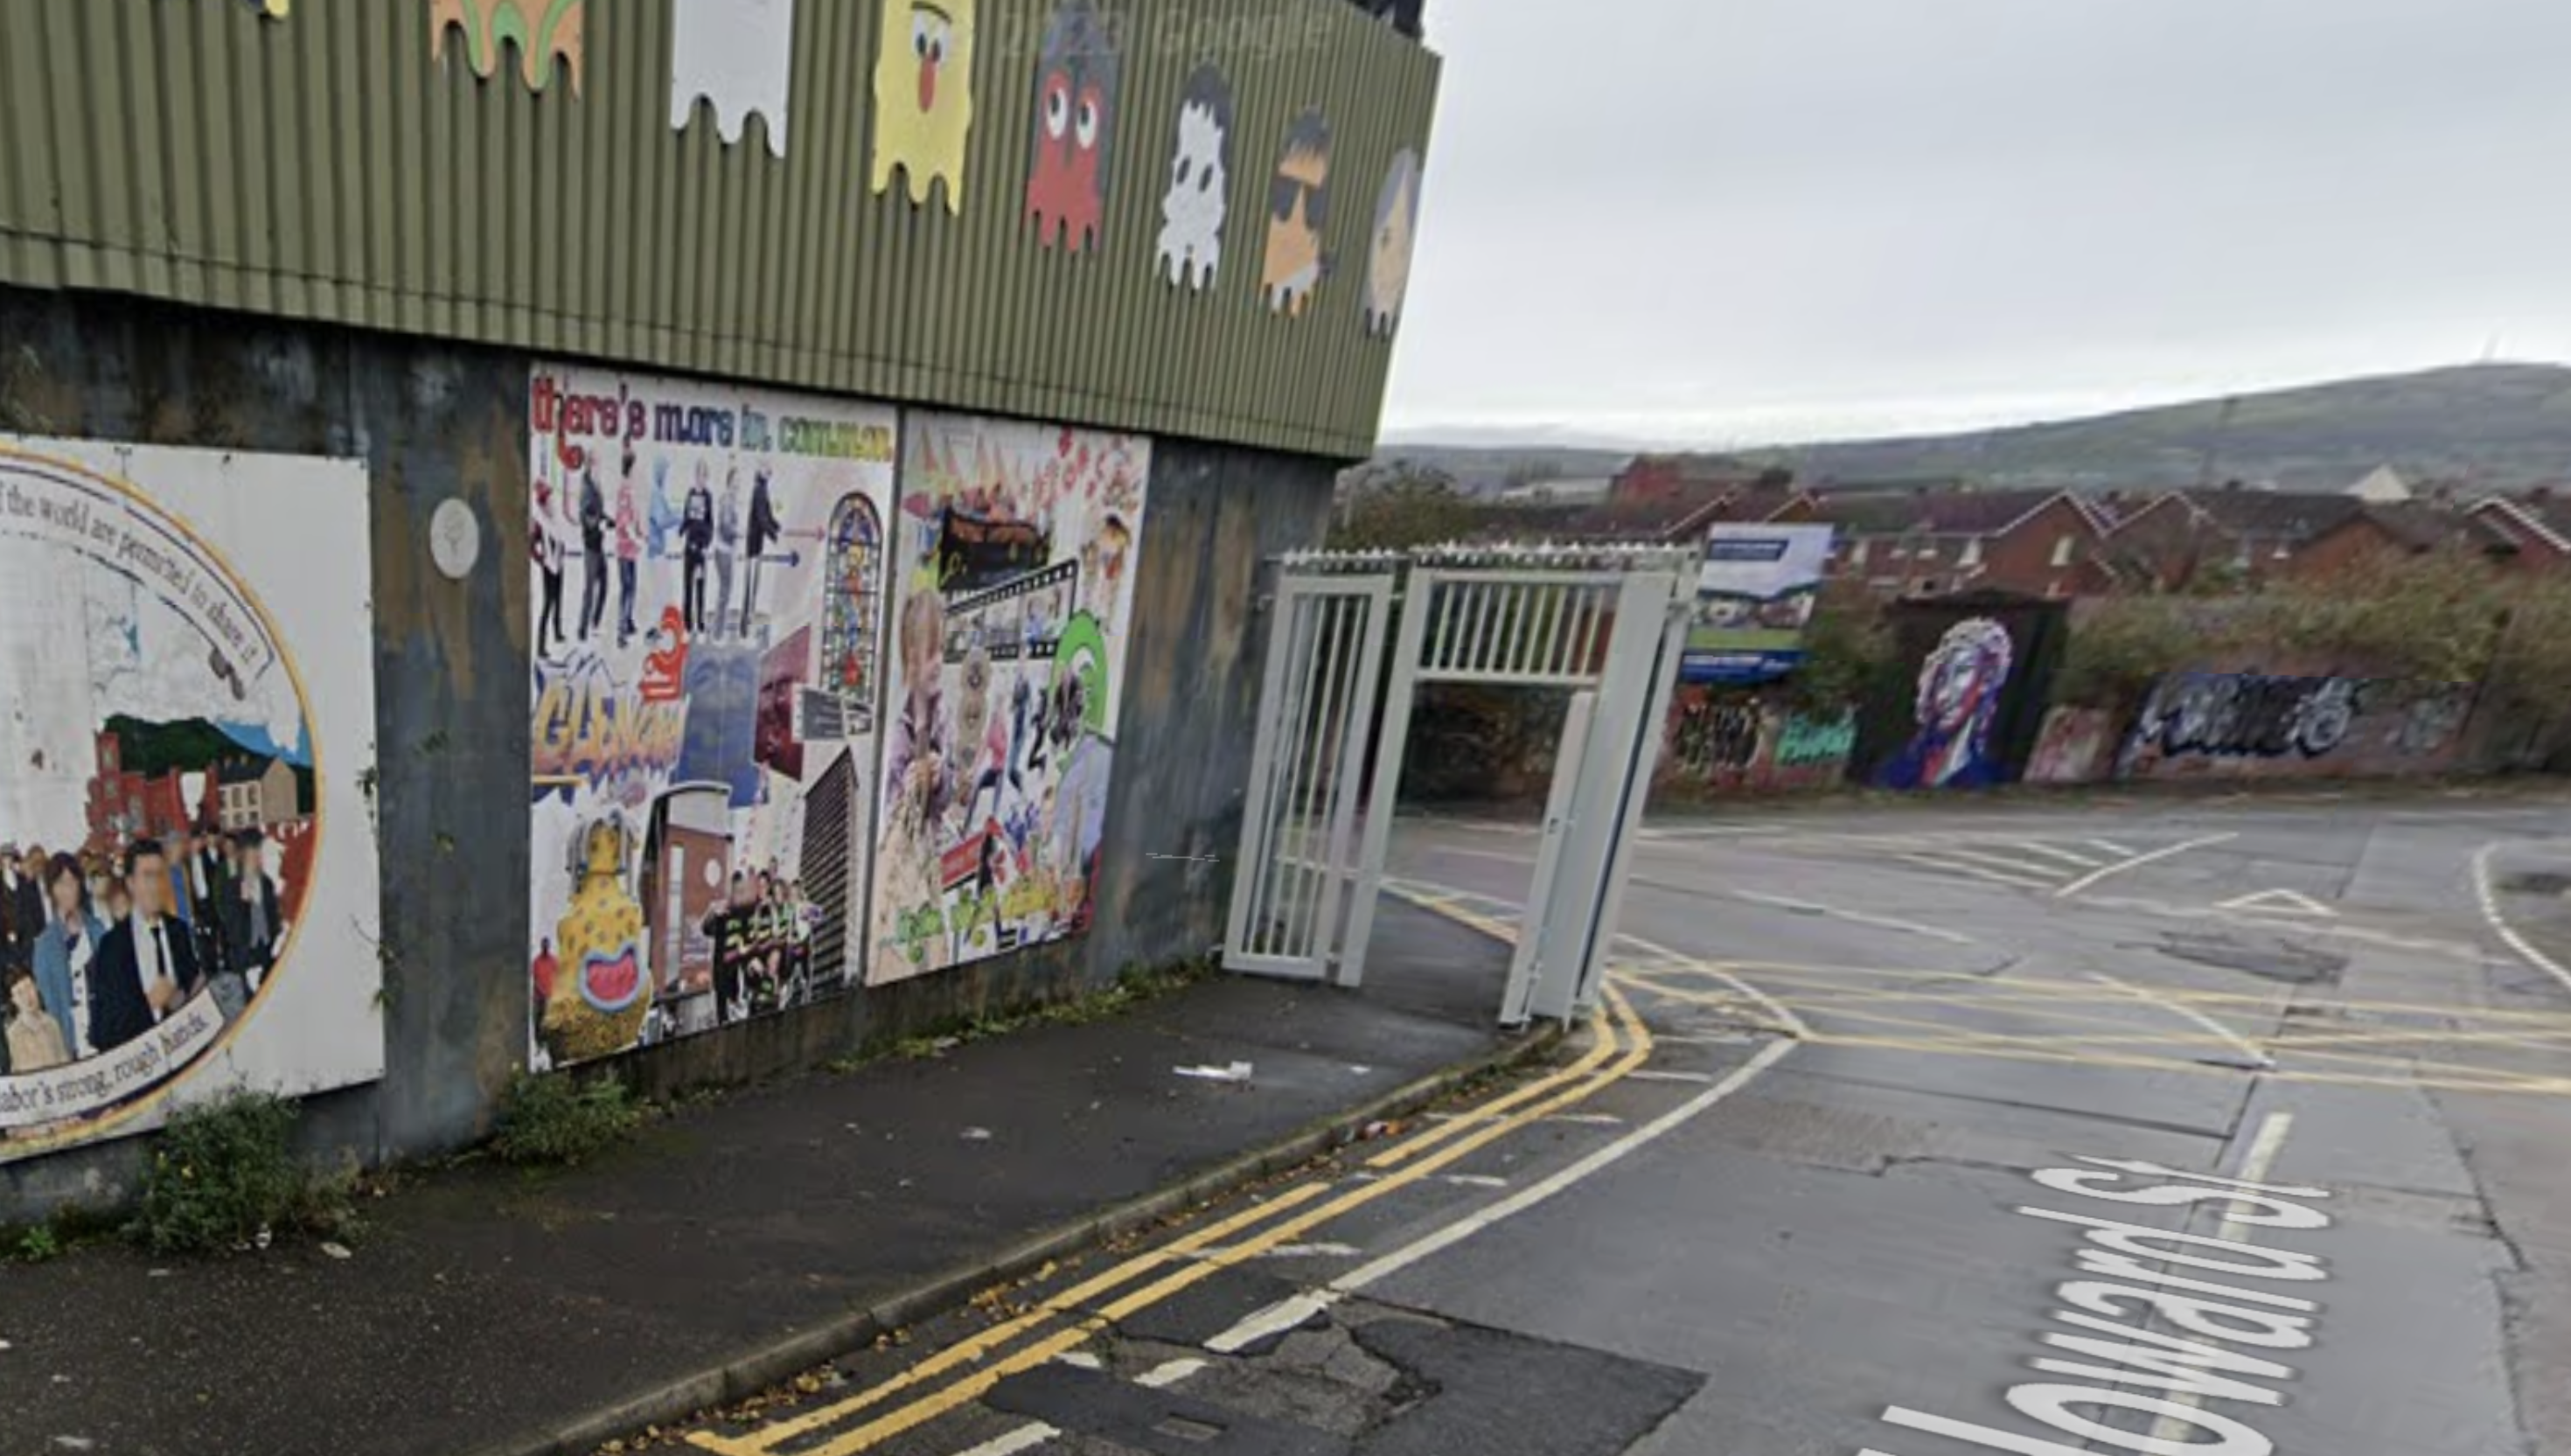 Streetview showing a high wall covered in murals and graffiti, with an iron security gate with barbed wire on top.